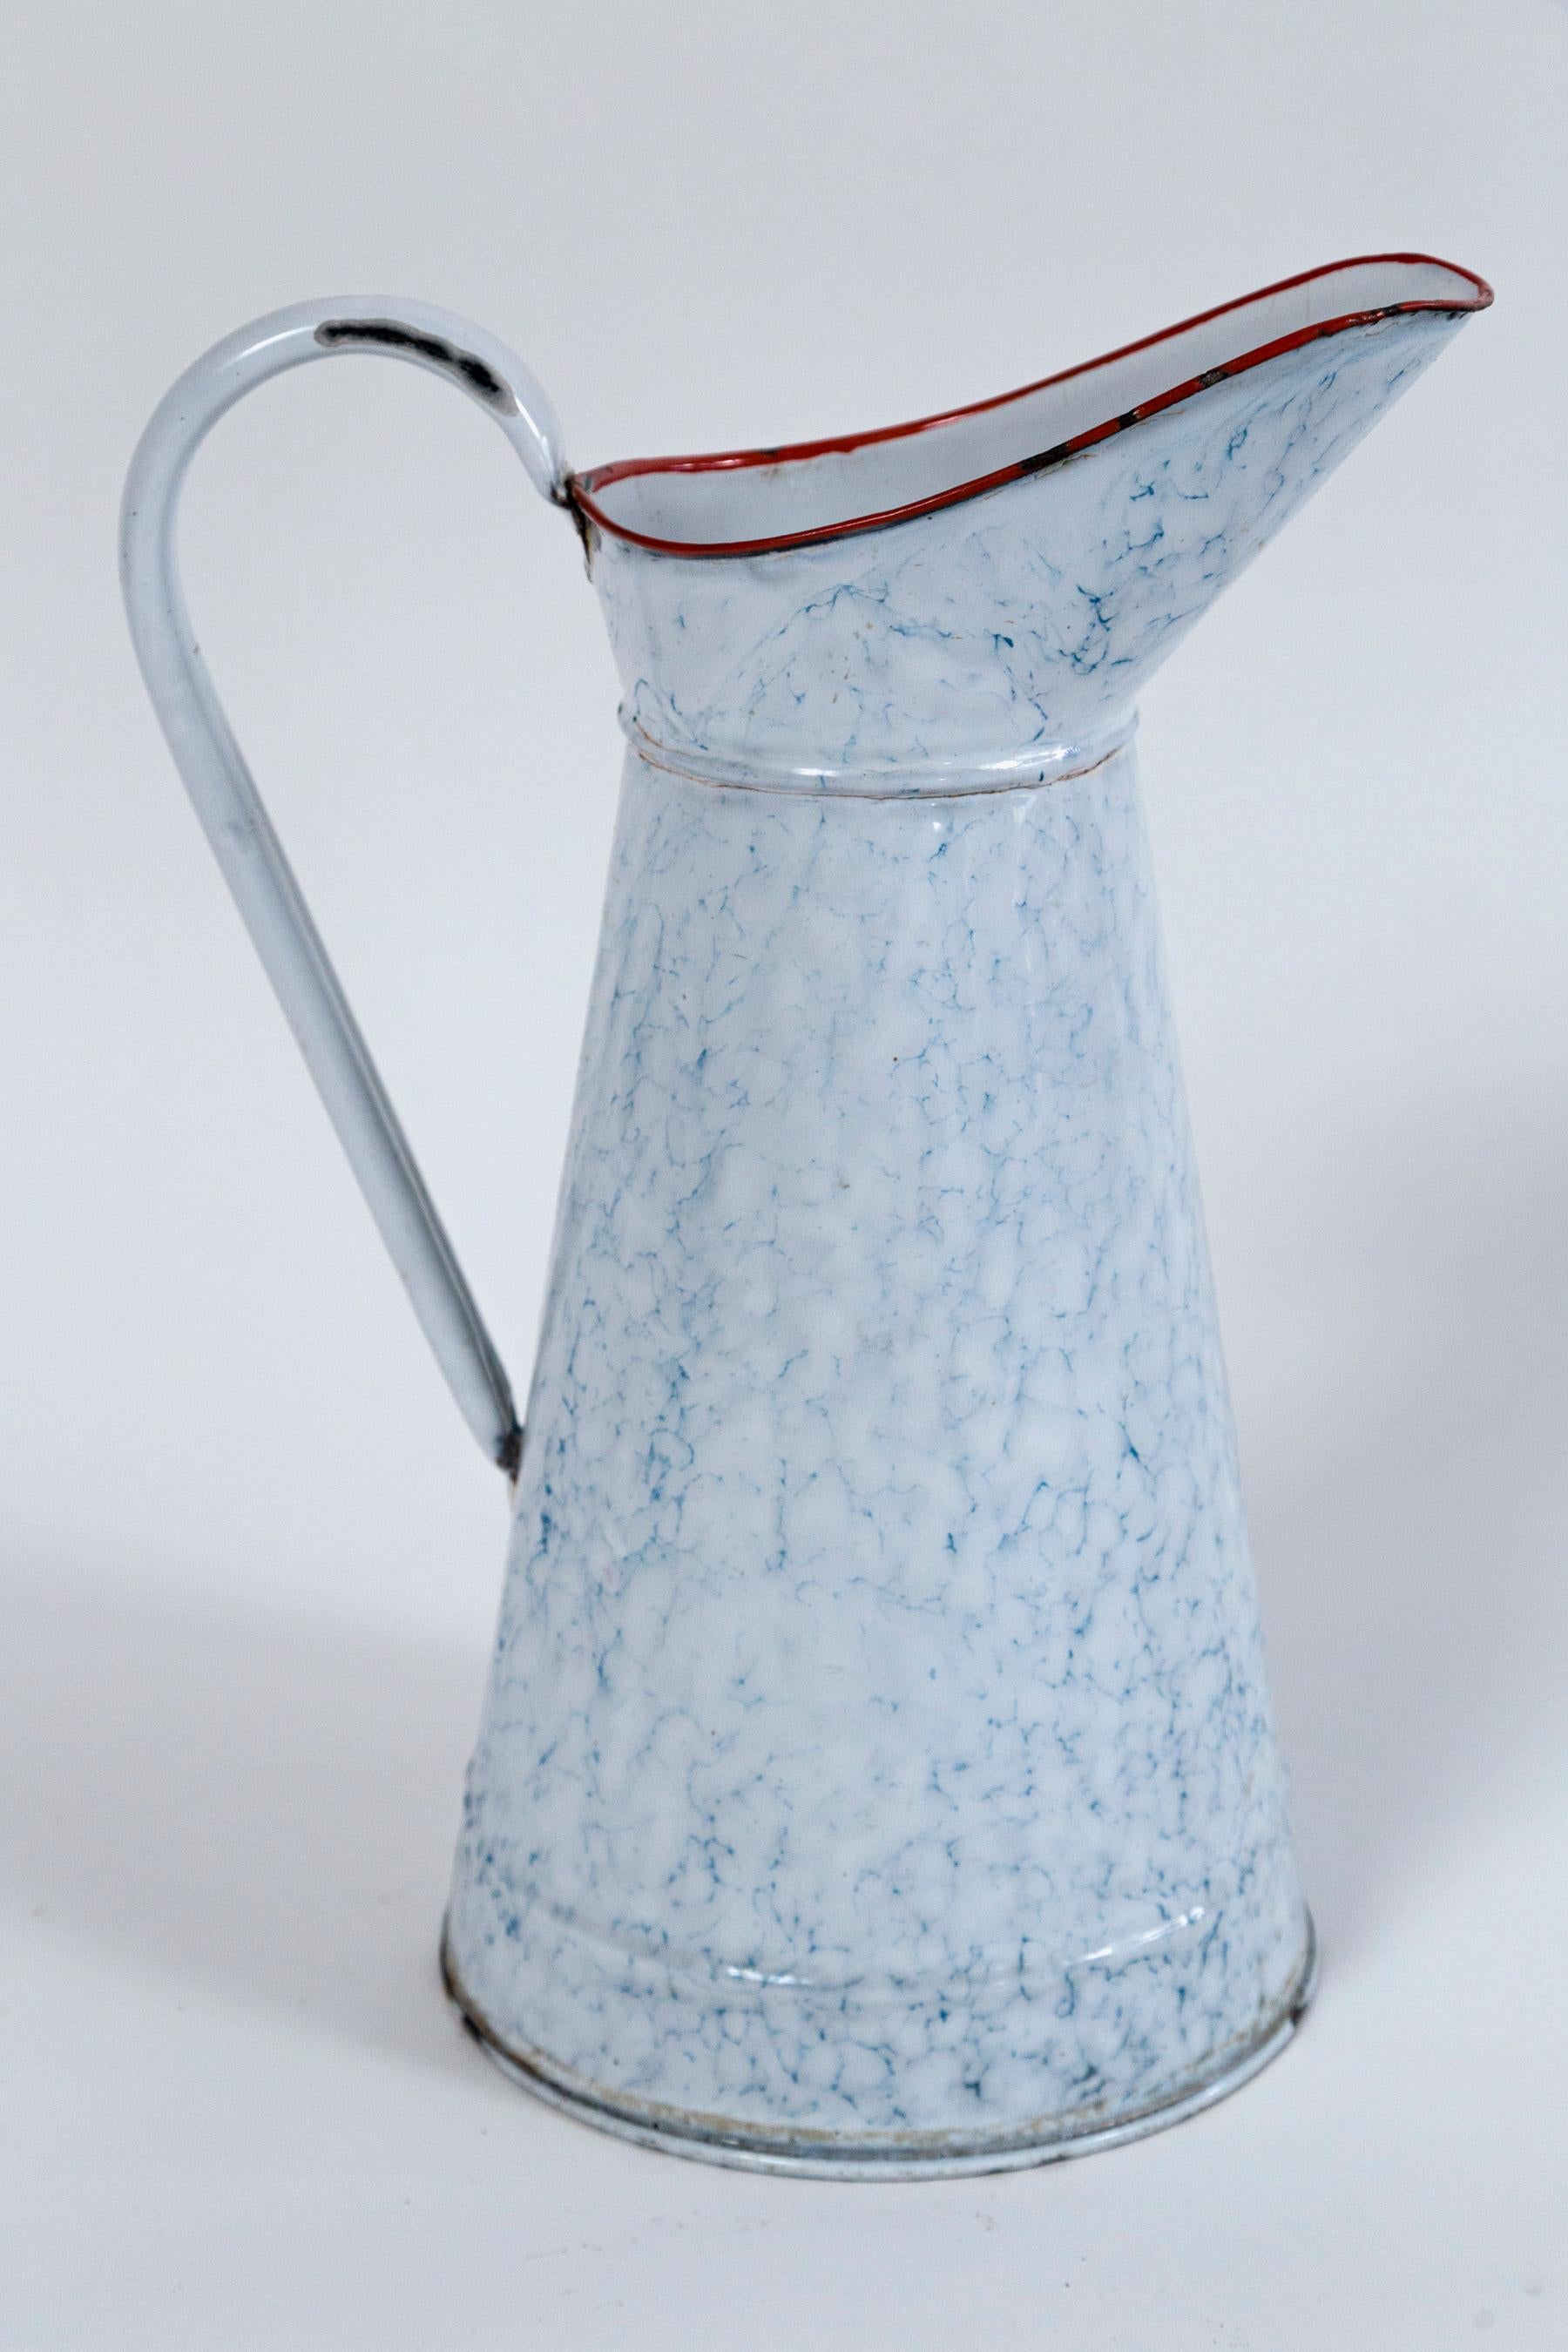 French Provincial Vintage French Blue and White Enamelware Pitcher, circa 1920's